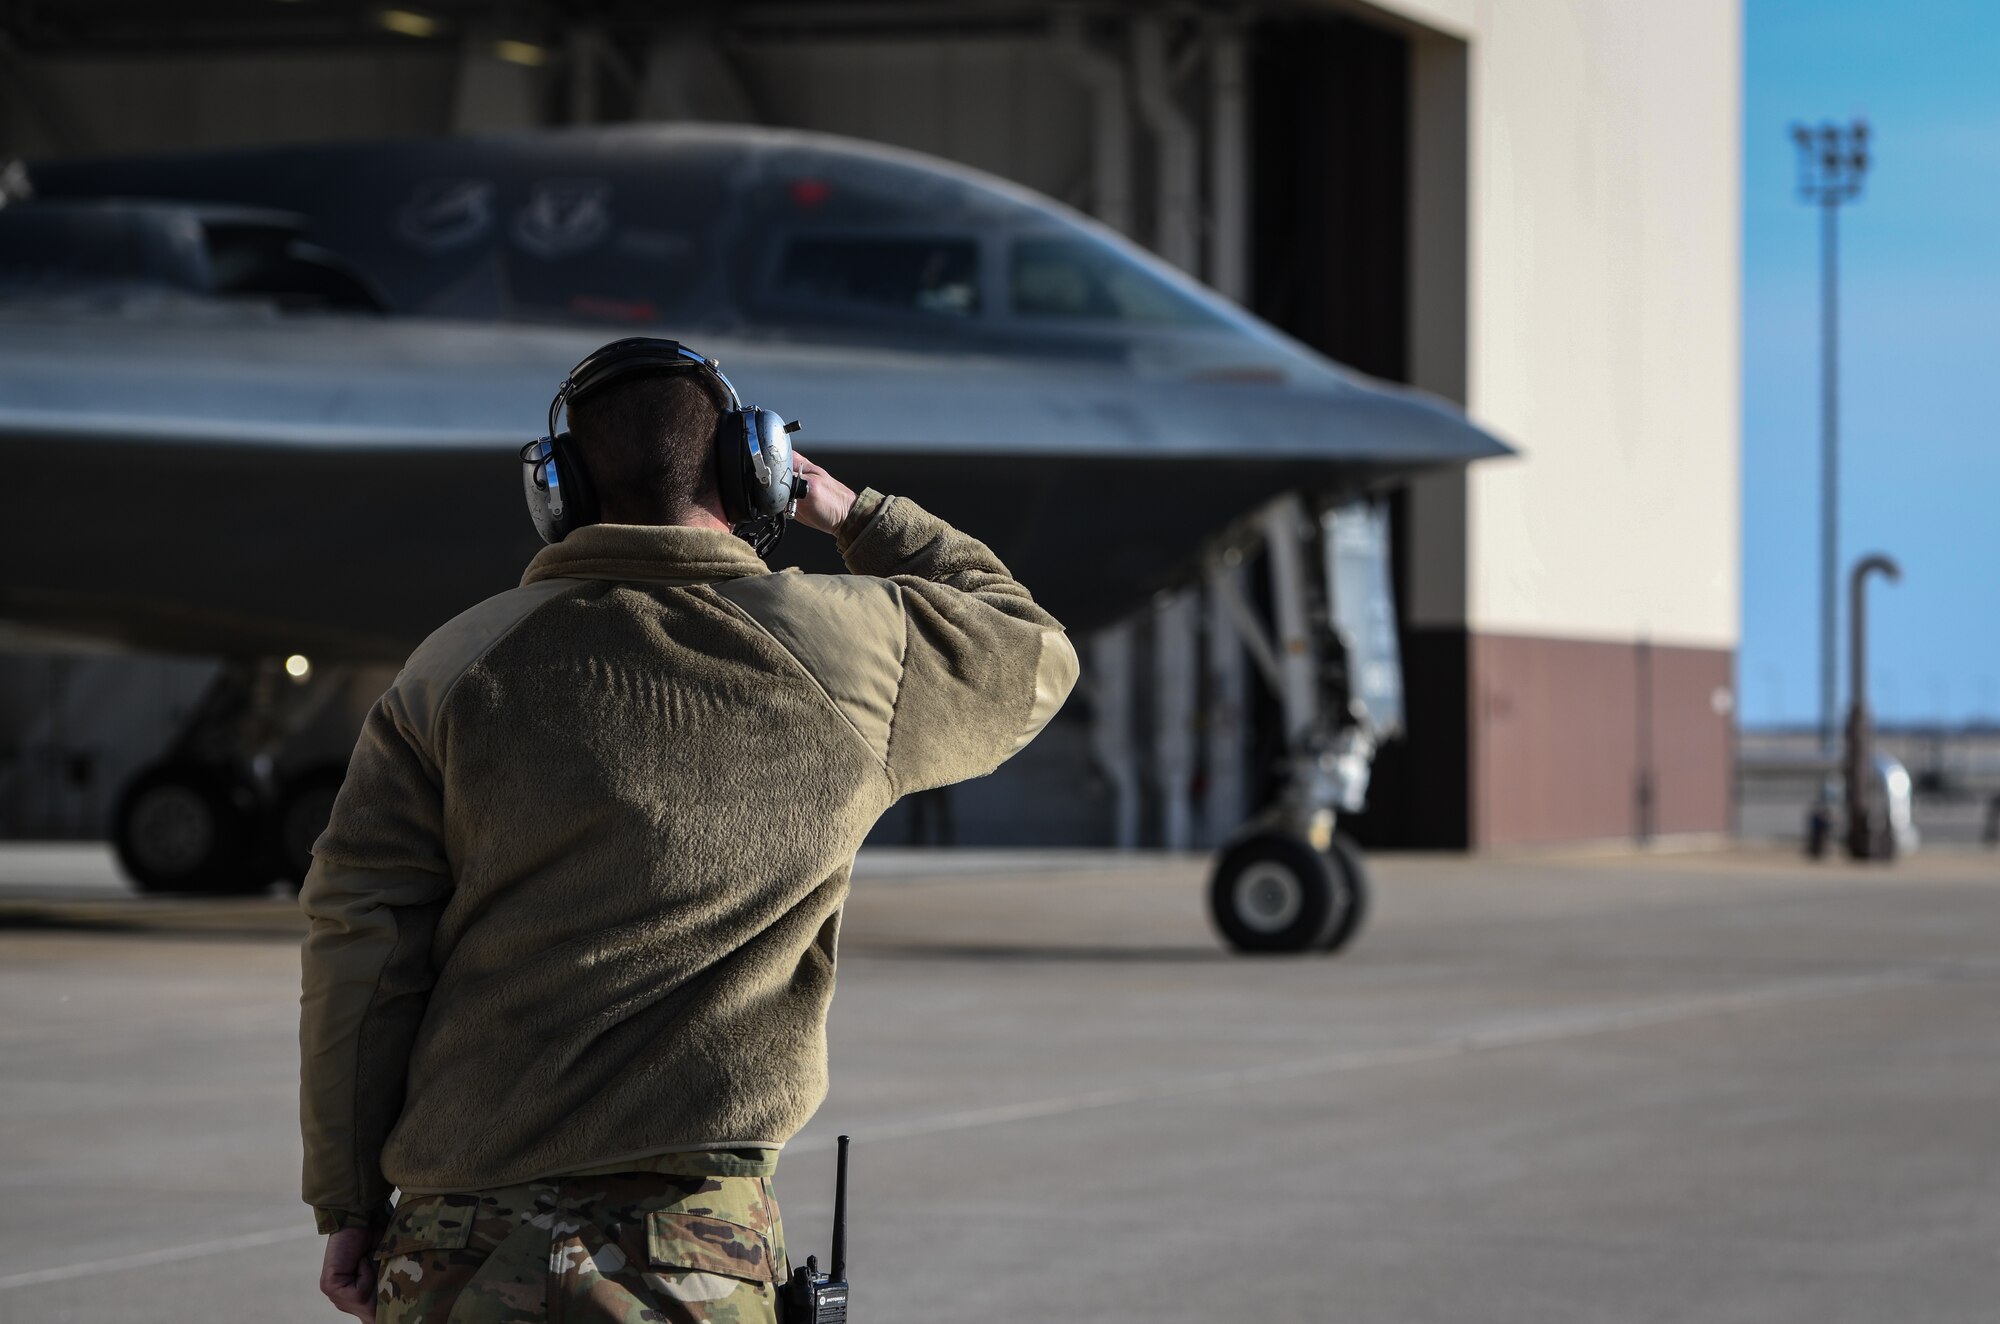 U.S. Air National Guard Tech. Sgt. Justin Aeckerle, a B-2 crew chief assigned to the 131st Maintenance Squadron, salutes B-2 Spirit pilot before takeoff at Whiteman Air Force Base, Missouri, March 8, 2020. The B-2 "Spirit of Washington" launched from Whiteman AFB to support U.S. Strategic Command Bomber Task Force operations in Europe. The 131s Bomb Wing’s 131st MXS is the total-force partner unit to the 509th Bomb Wing. (U.S. Air Force photo by Tech. Sgt. Alexander W. Riedel)